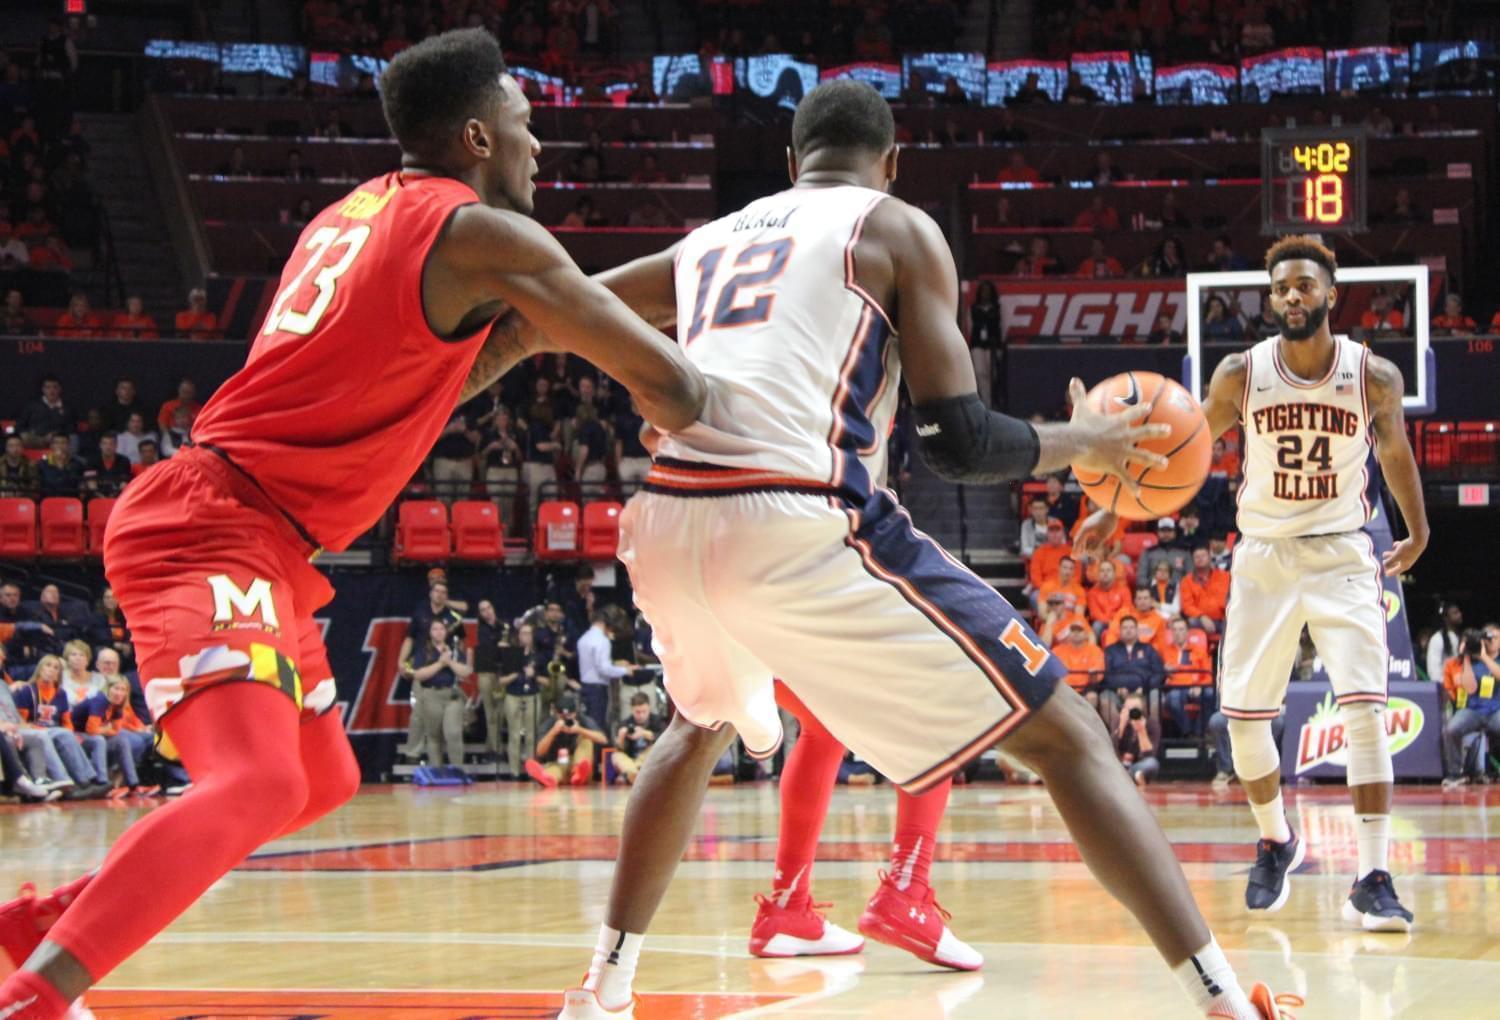 Illinois' Mark Alstork (24) passes to Leron Black (12) during a 92-91 overtime loss to Maryland Sunday night in Champaign.